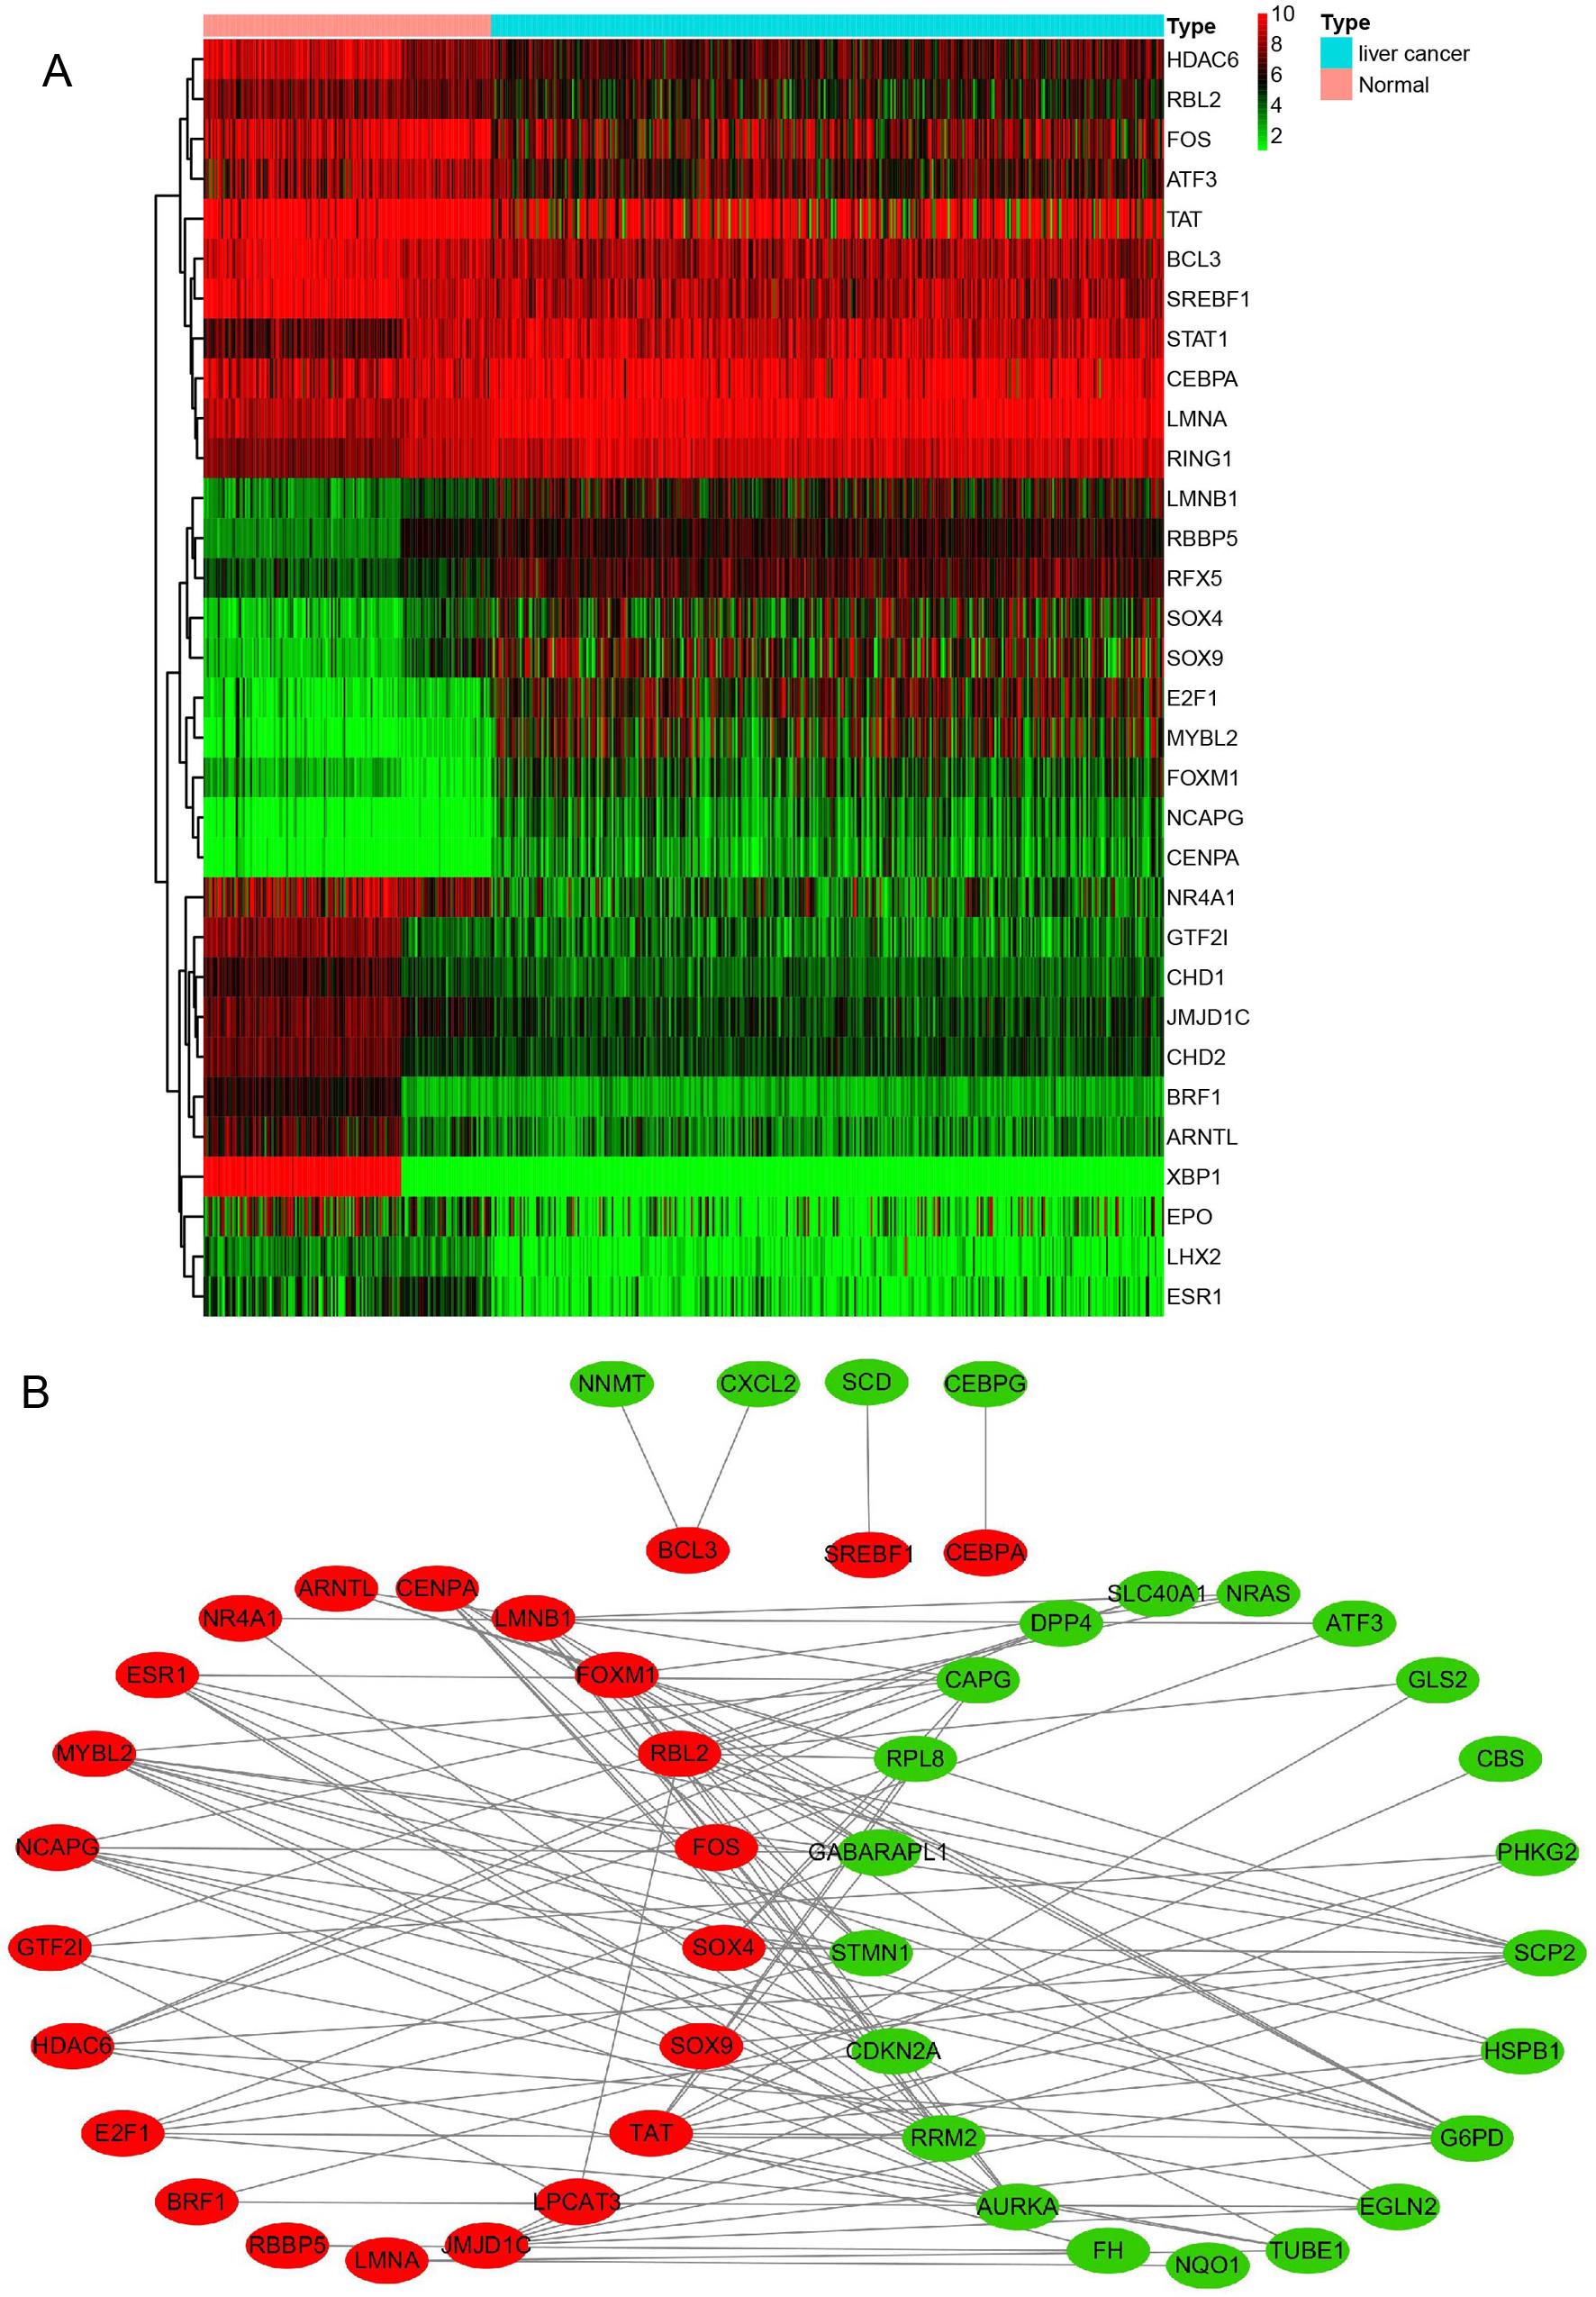 Differential analysis of TFs and construction of the TF-ferrGene regulatory network.